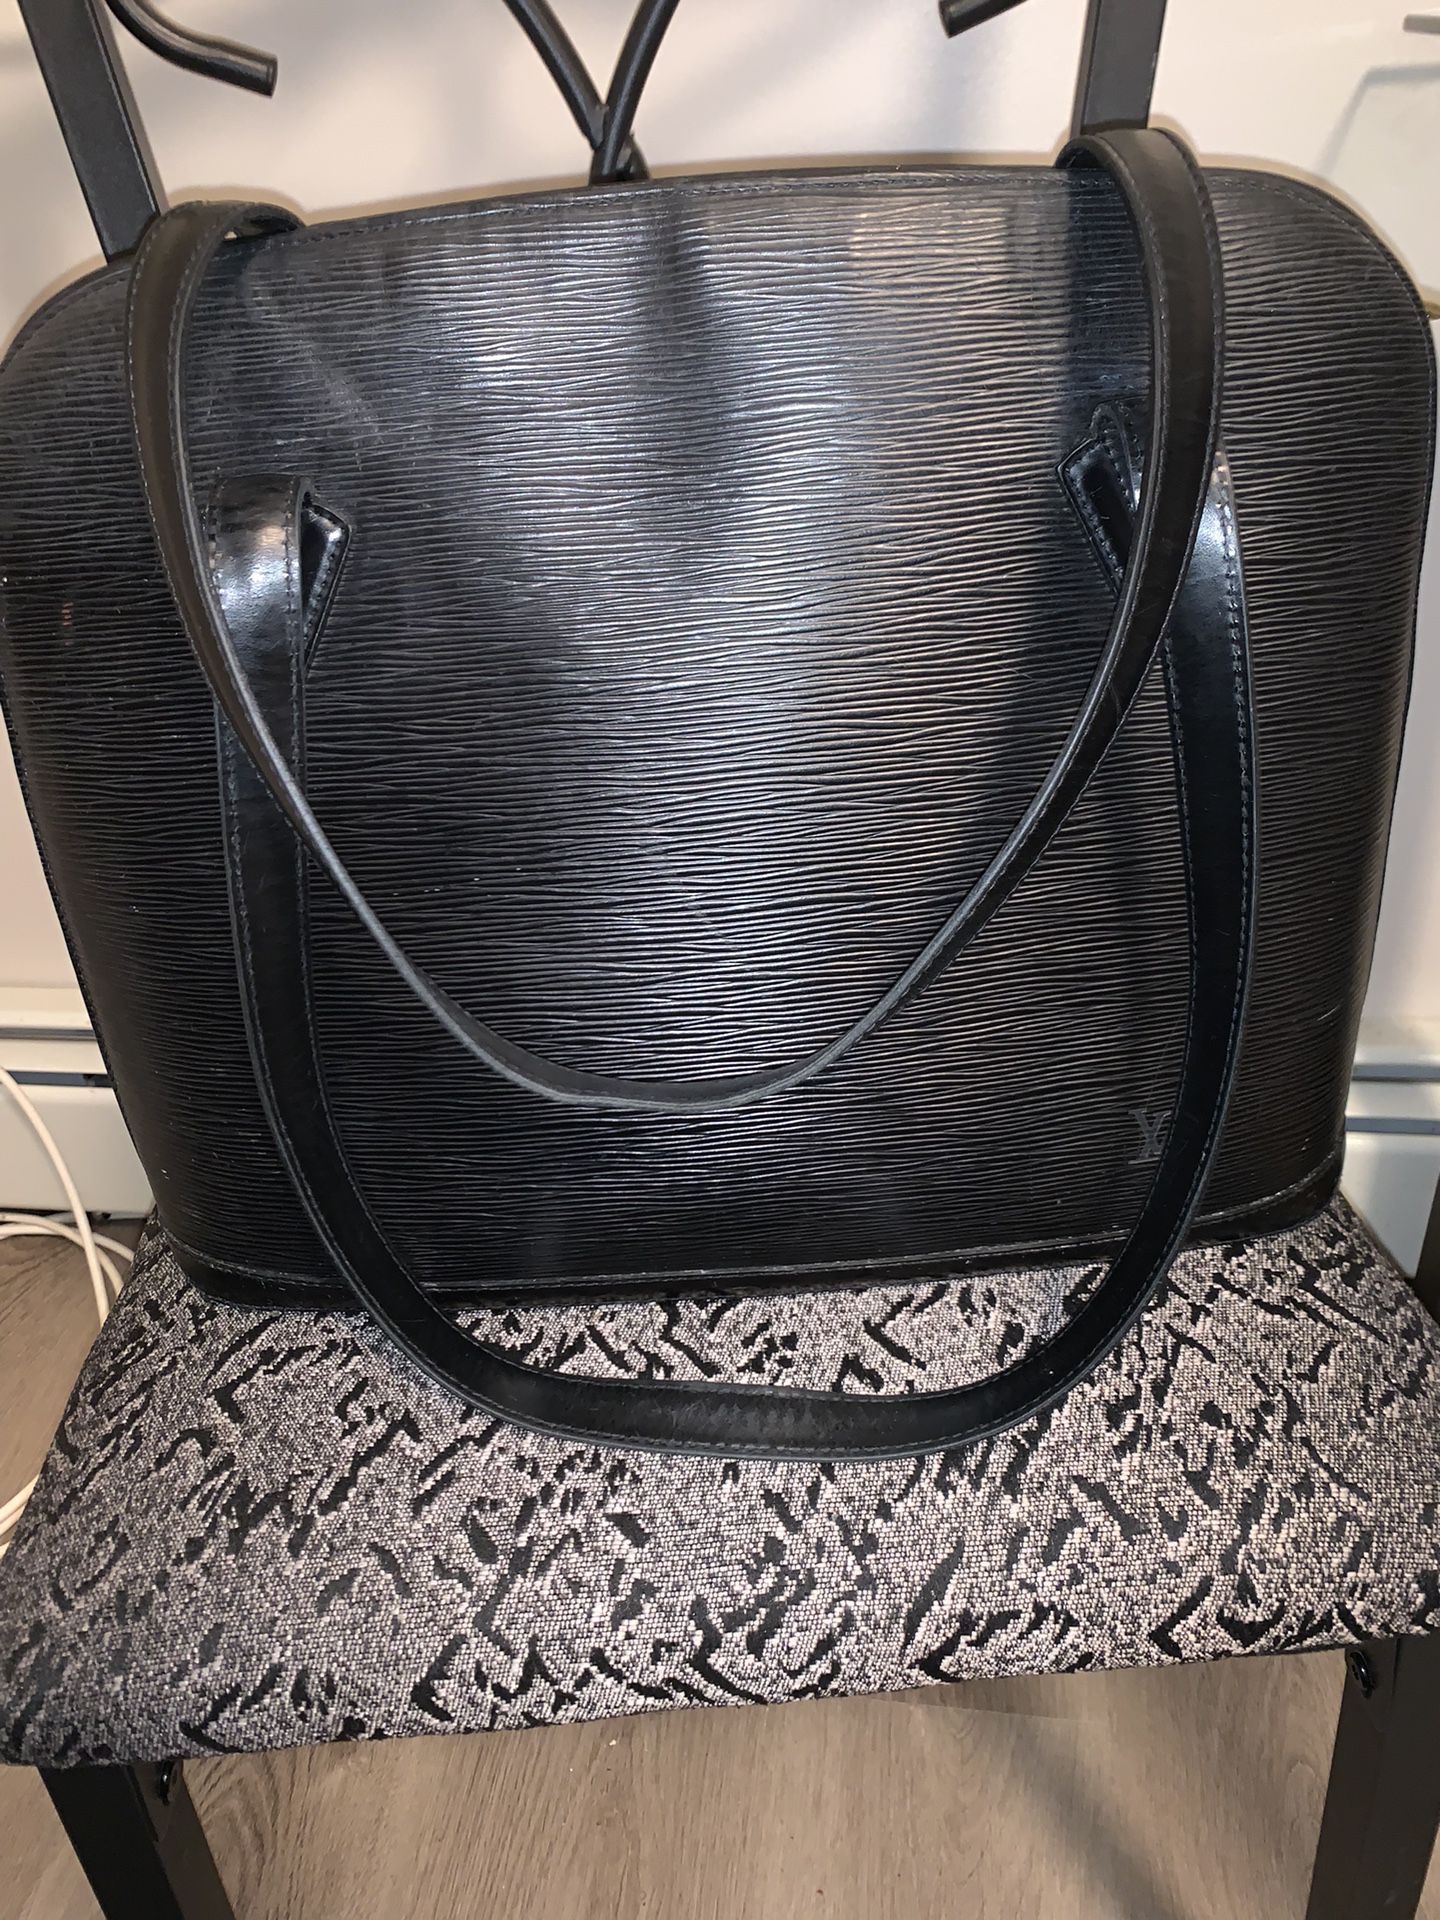 Louis Vuitton Monogram Alma BB for Sale in New York, NY - OfferUp